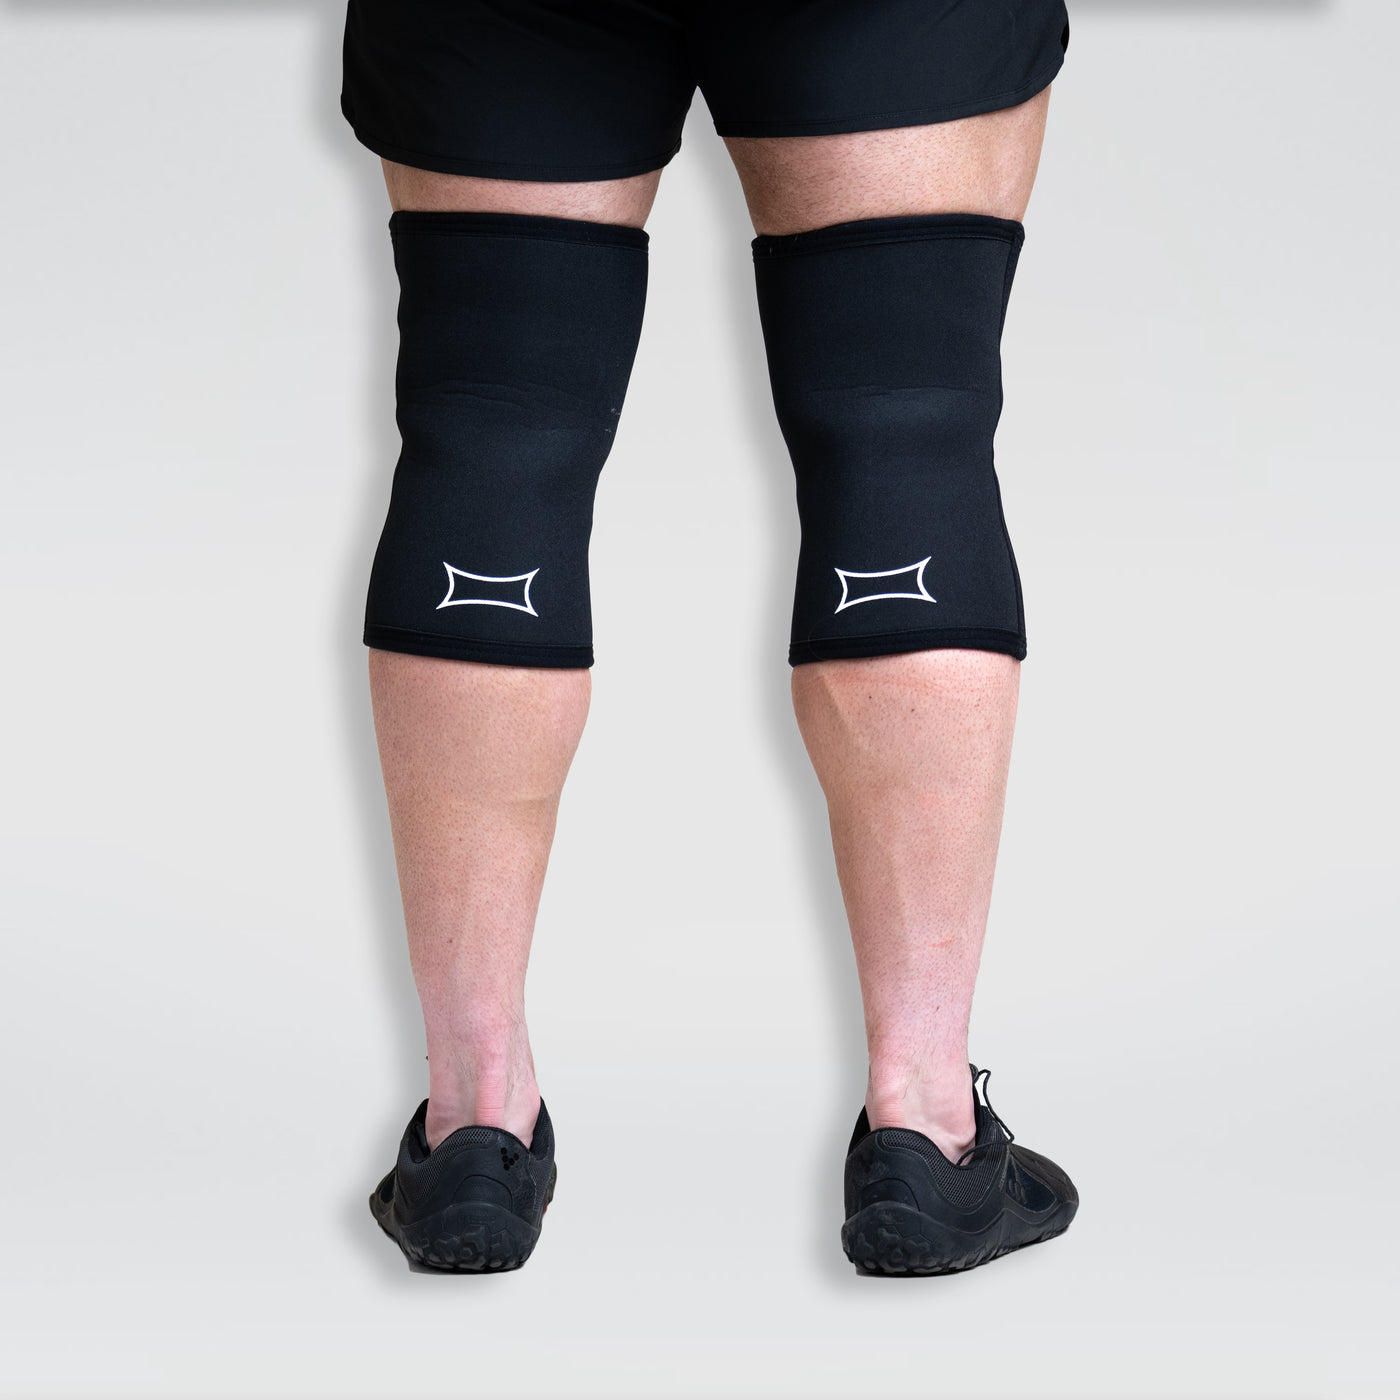 STrong Knee Sleeves  Protective & Supportive Sleeves – Mark Bell Sling Shot ®